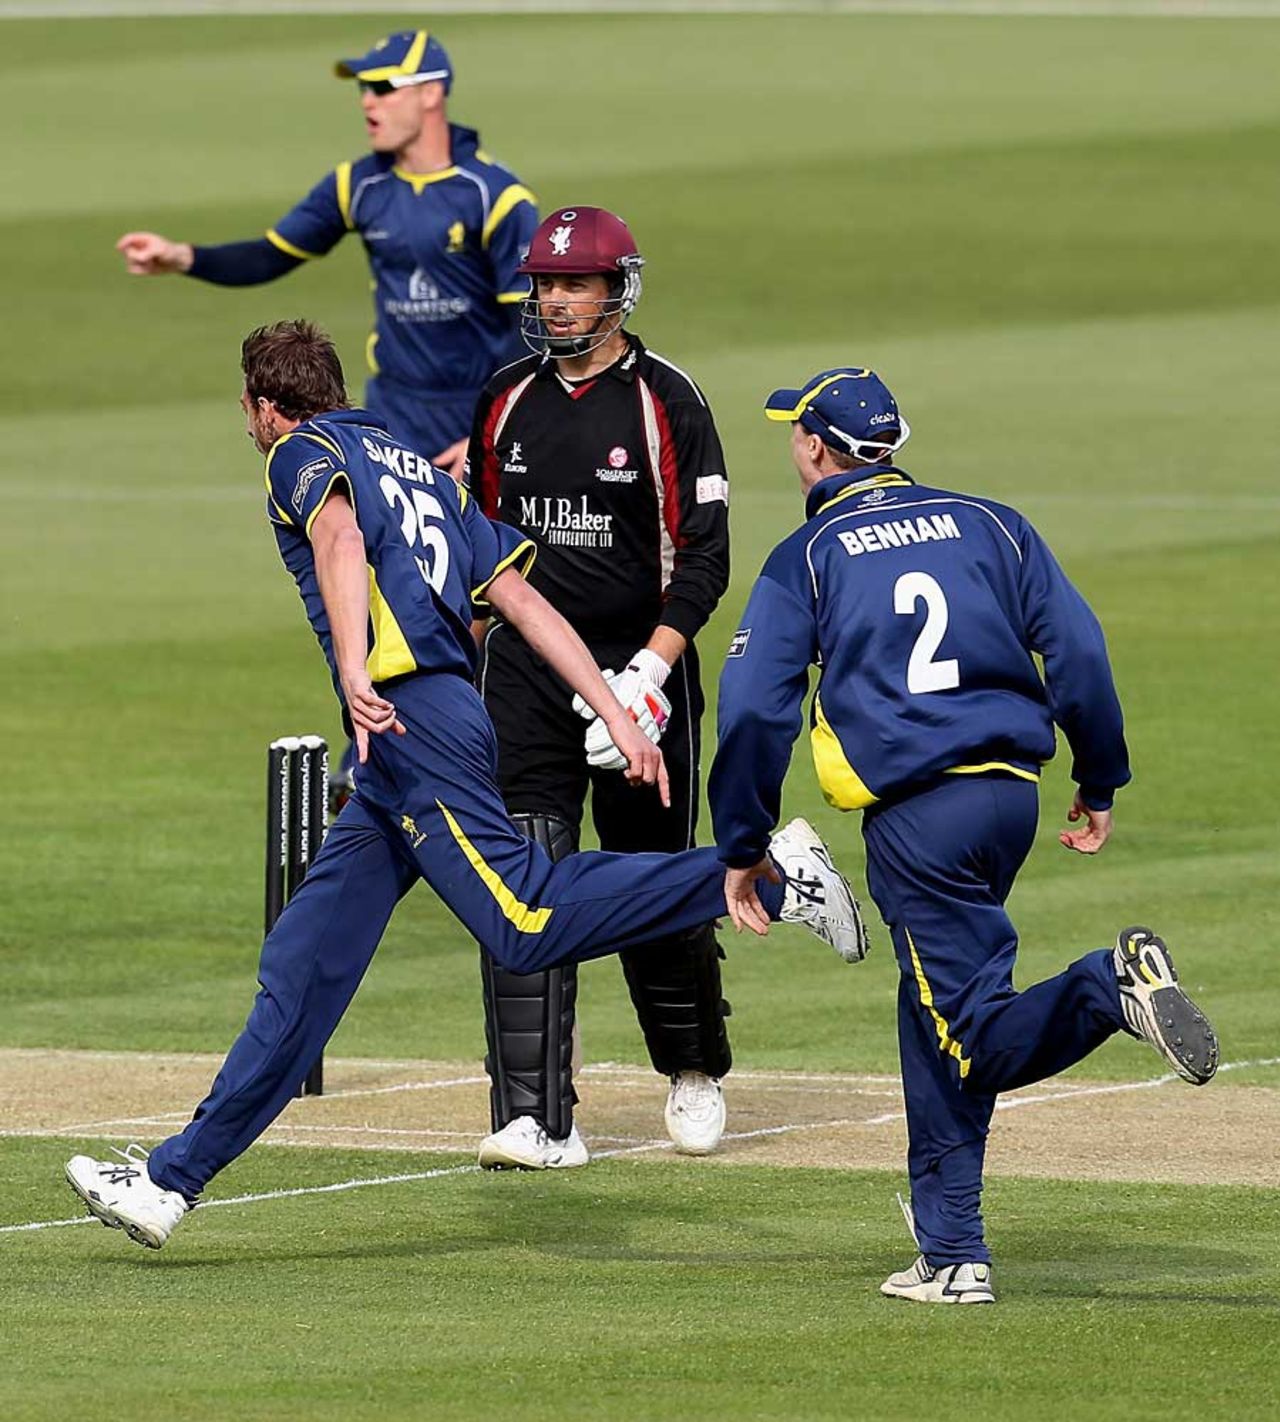 Neil Saker removed Marcus Trescothick for a duck, Unicorns v Somerset, CB40, Wormsley, May 1, 2011